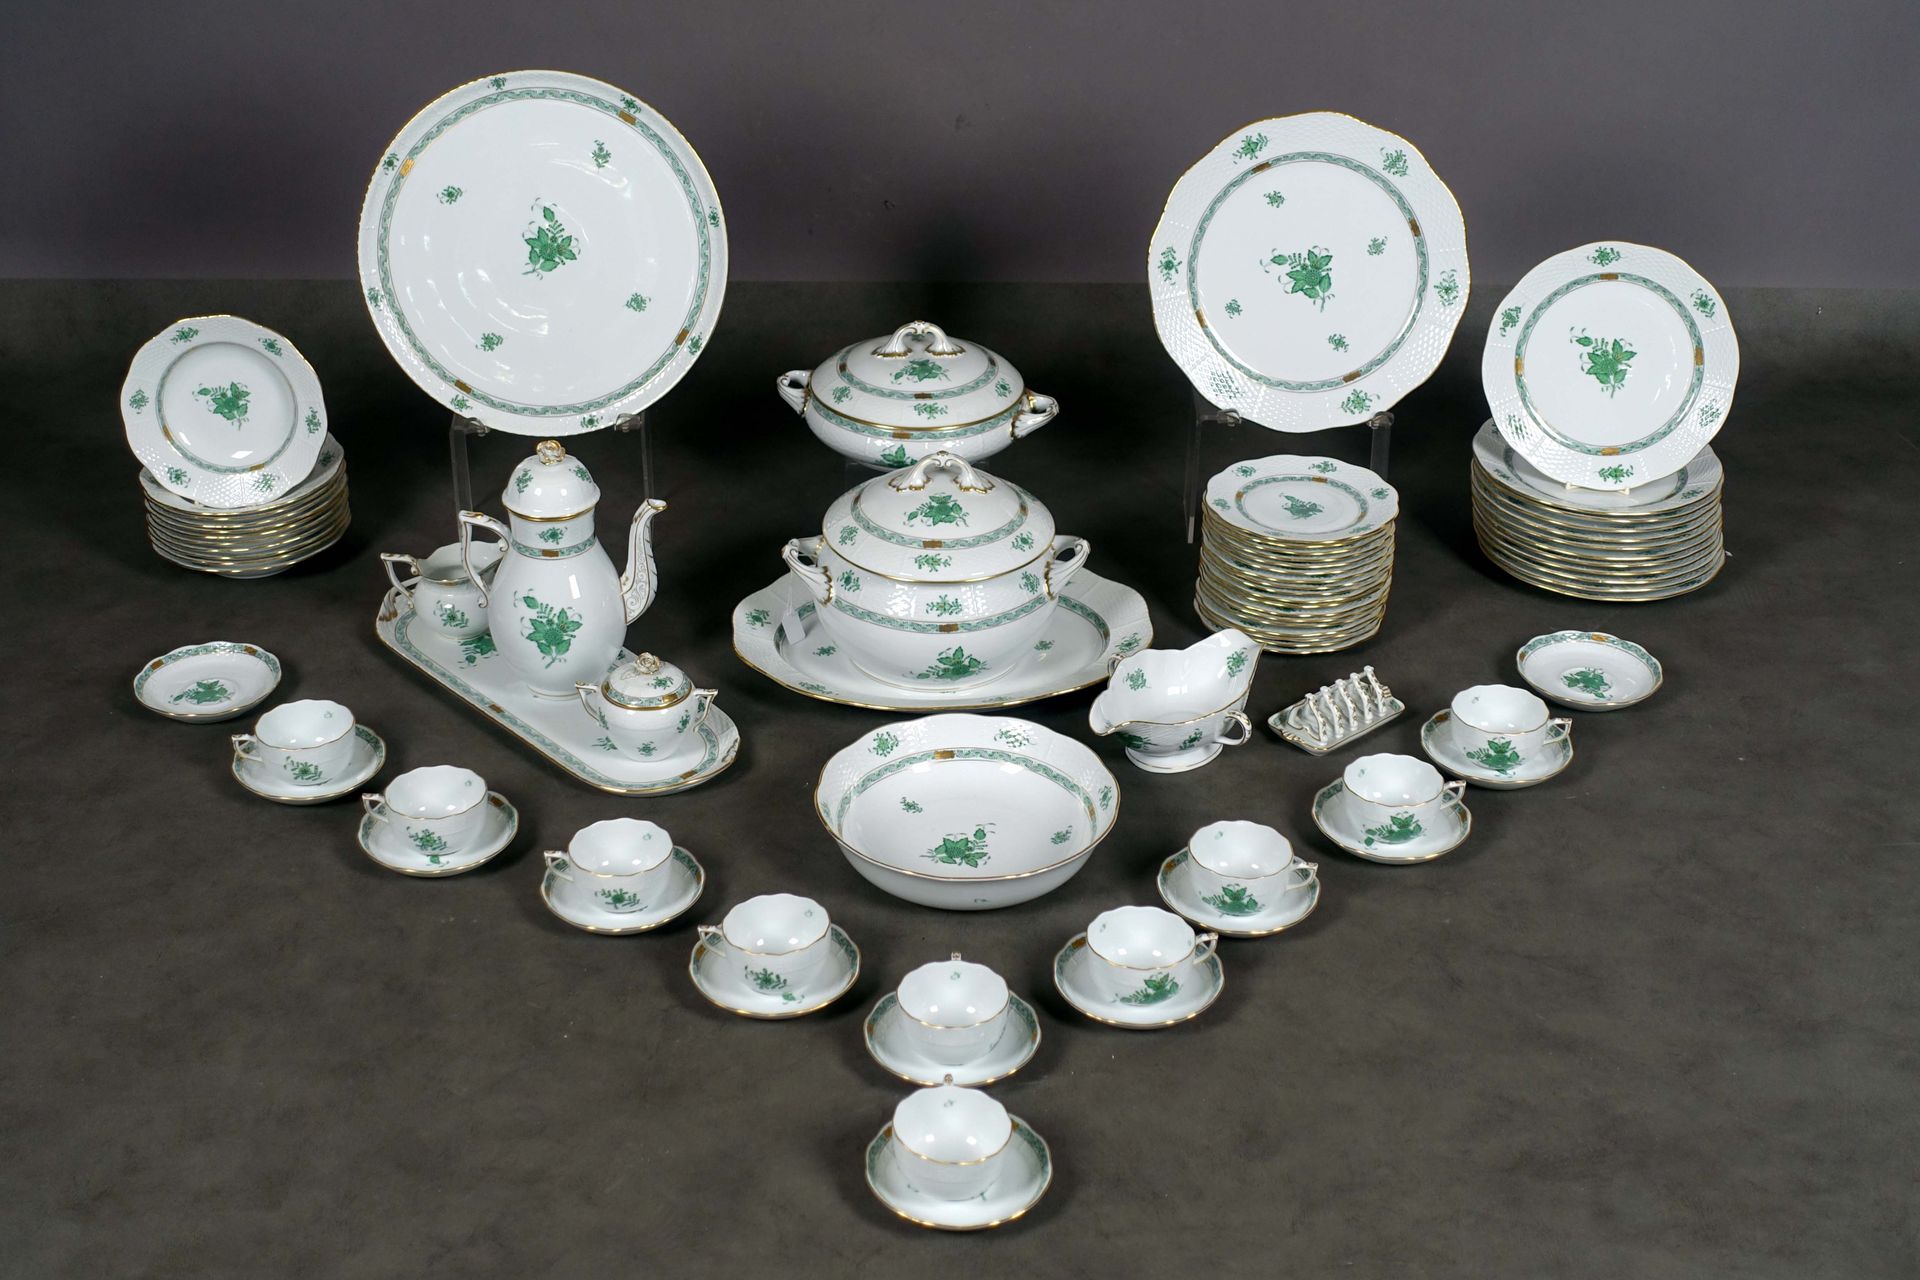 Herend. Important porcelain dinner service of the "Apponyi" model (created in 19&hellip;